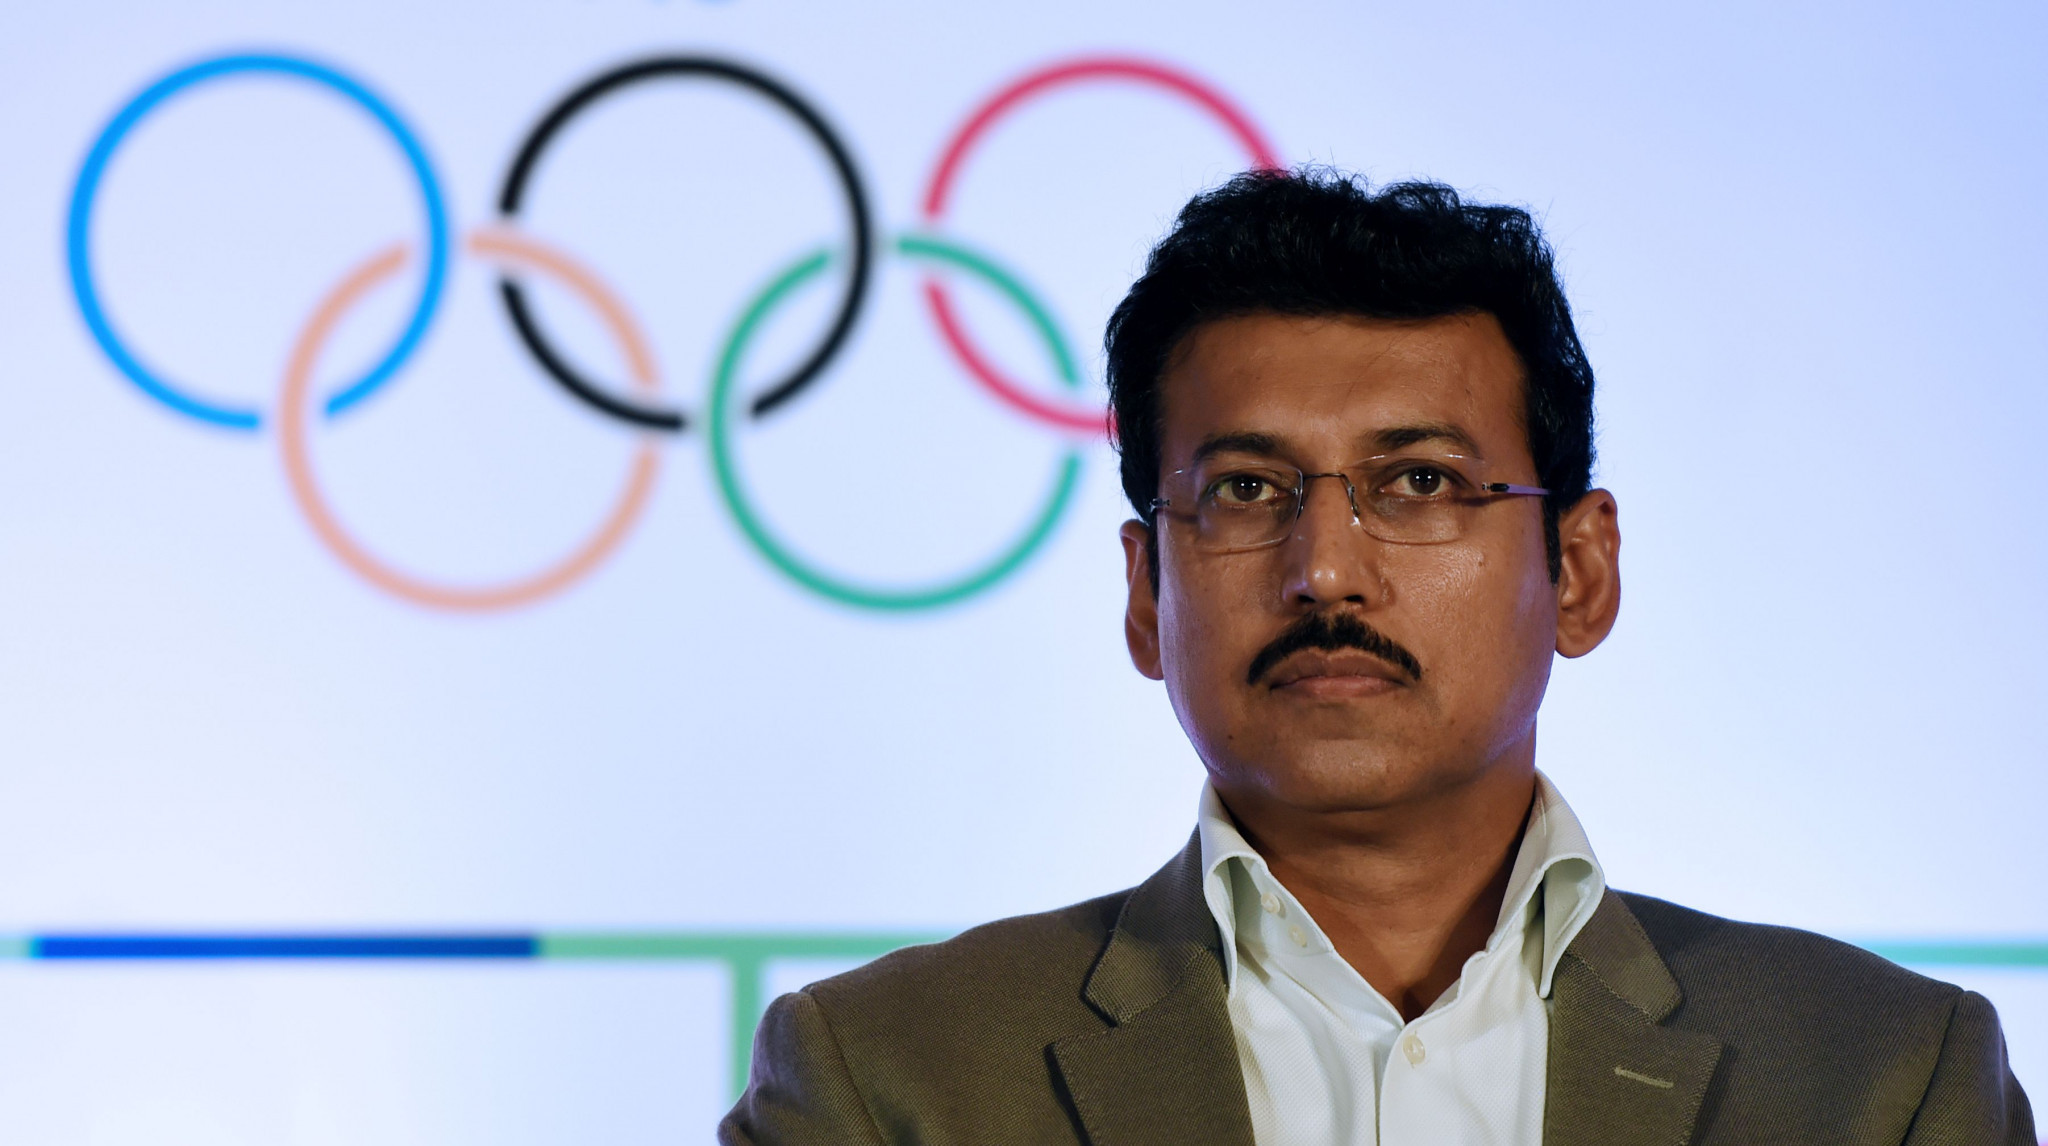 India’s Sports Minister Rajyavardhan Singh Rathore has promised that "nothing will be left undone" as the country’s athletes prepare for the Tokyo 2020 Olympic Games ©Getty Images